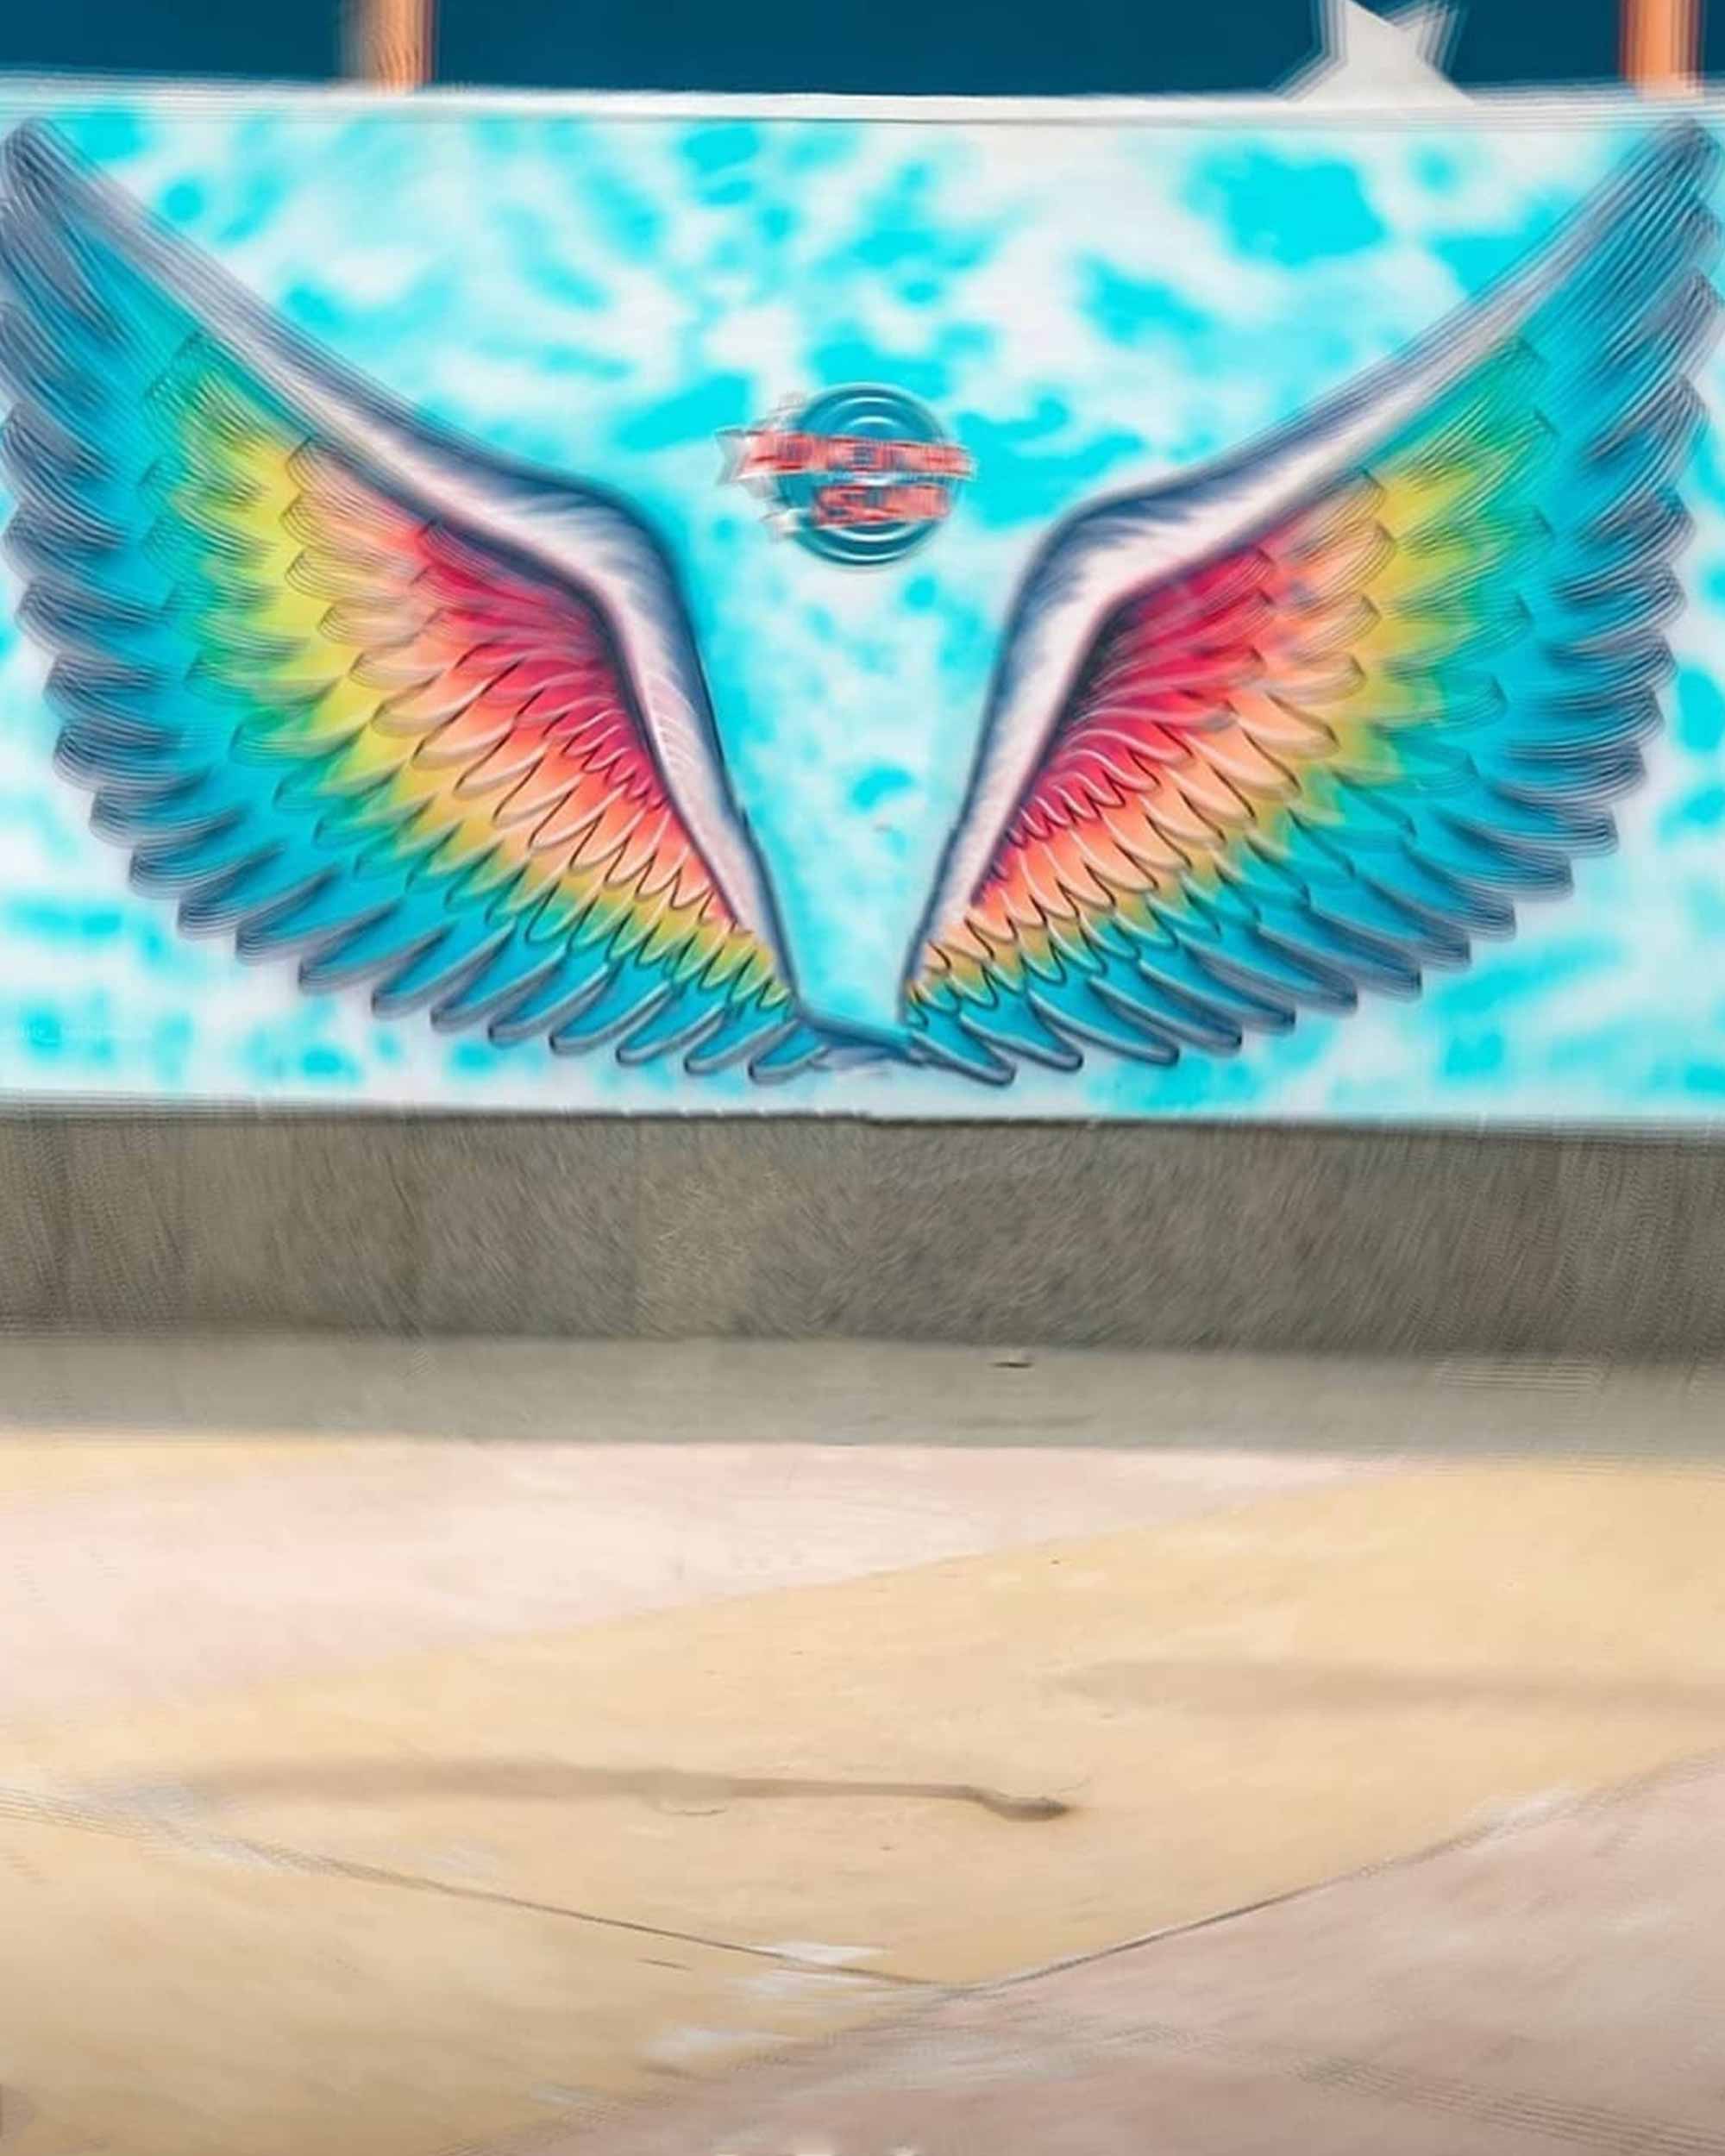 Colorful Wing Wall Photo Editing Background Free Stock Image